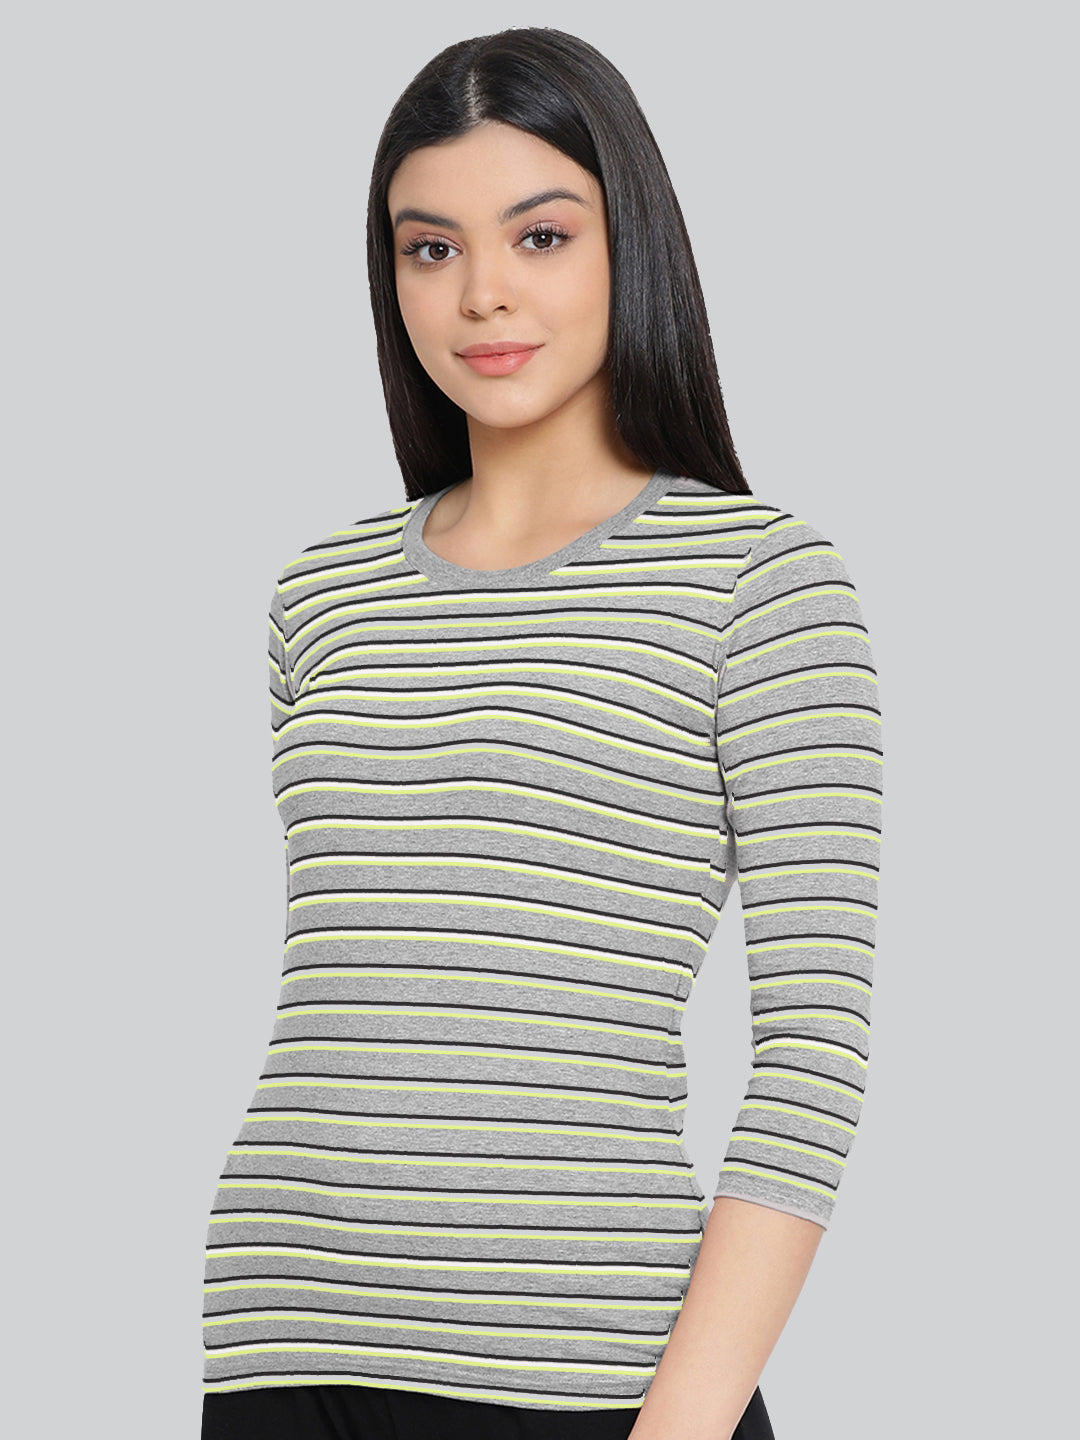 Grey Base with Black and White Stripes Round Neck 3/4 Sleeve T-Shirt #408